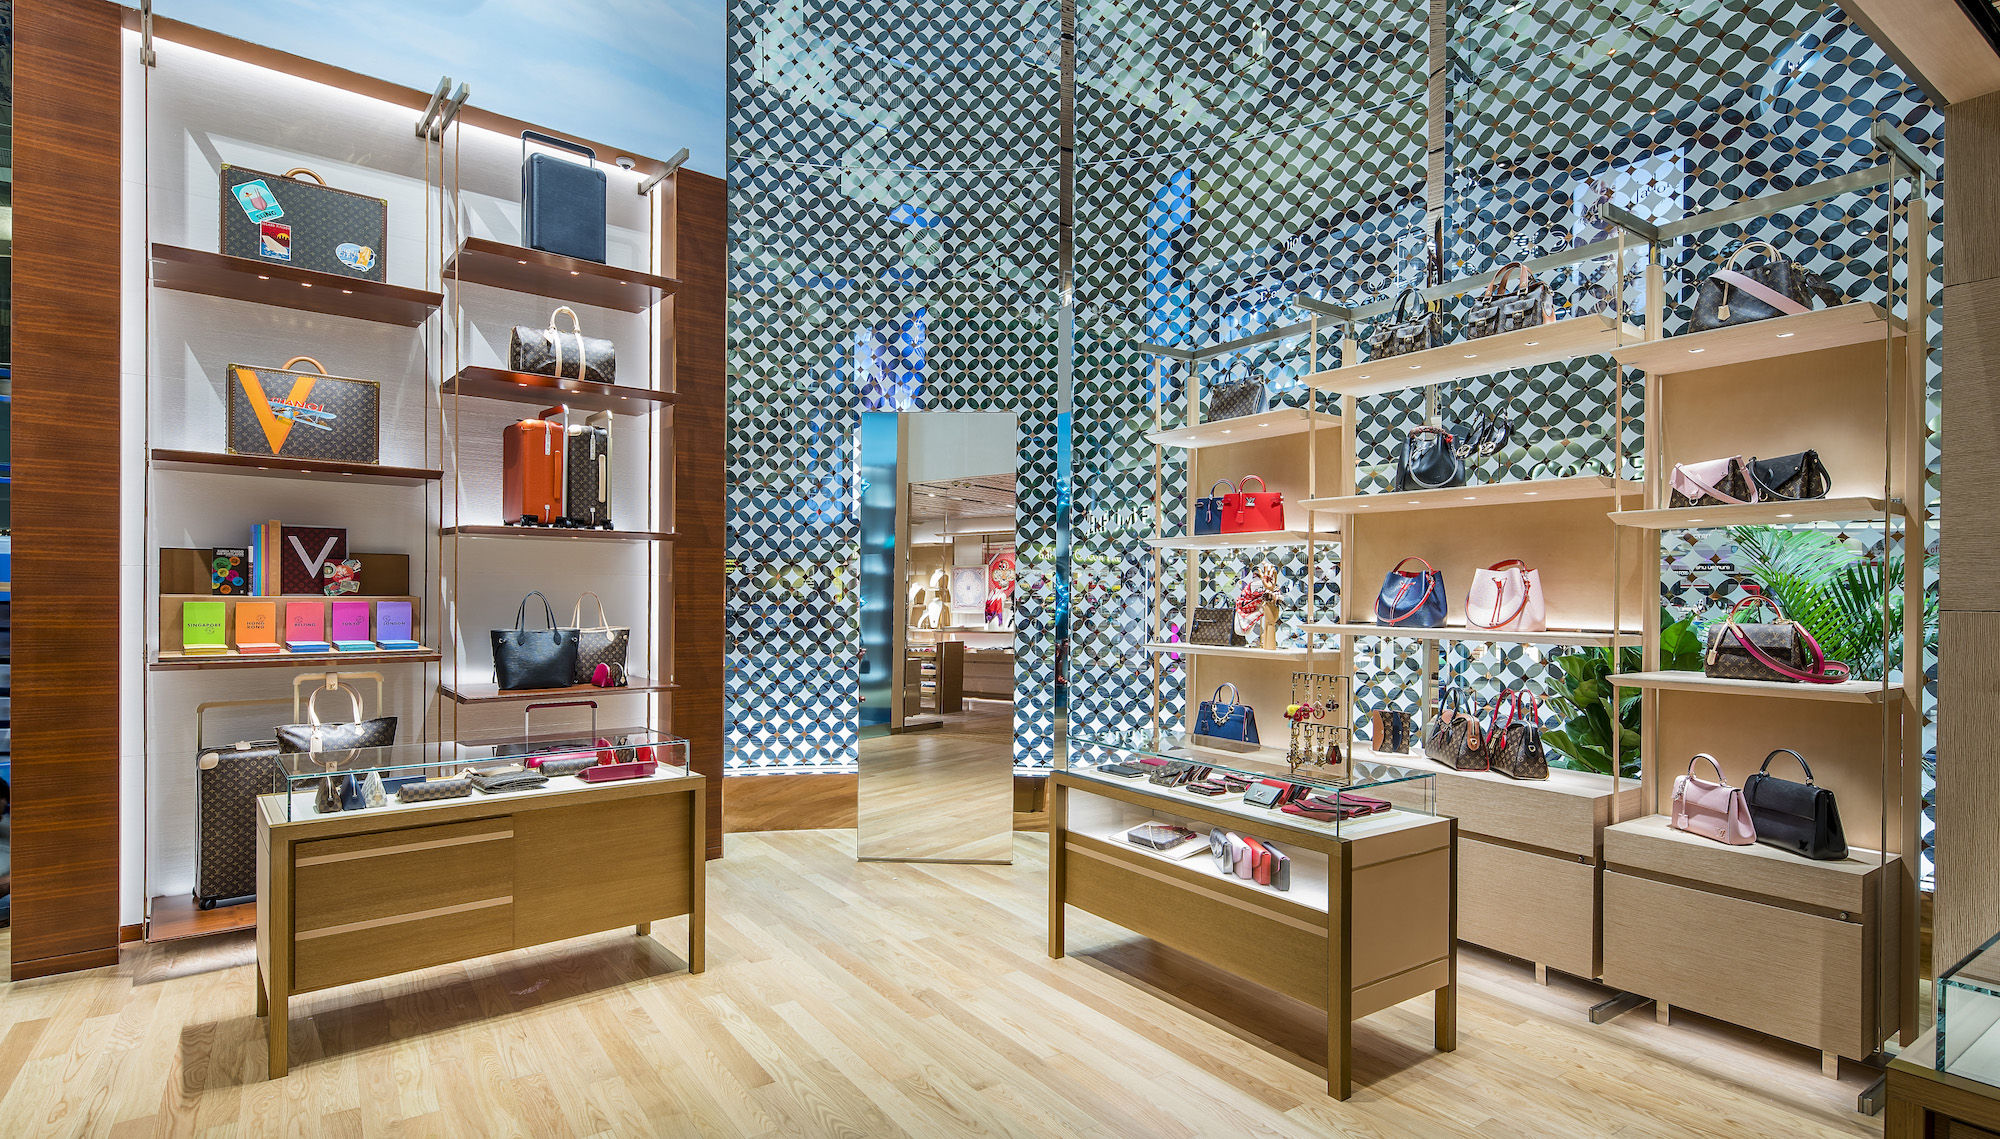 Largest Louis Vuitton boutique in South-East Asia - LUXUO SG